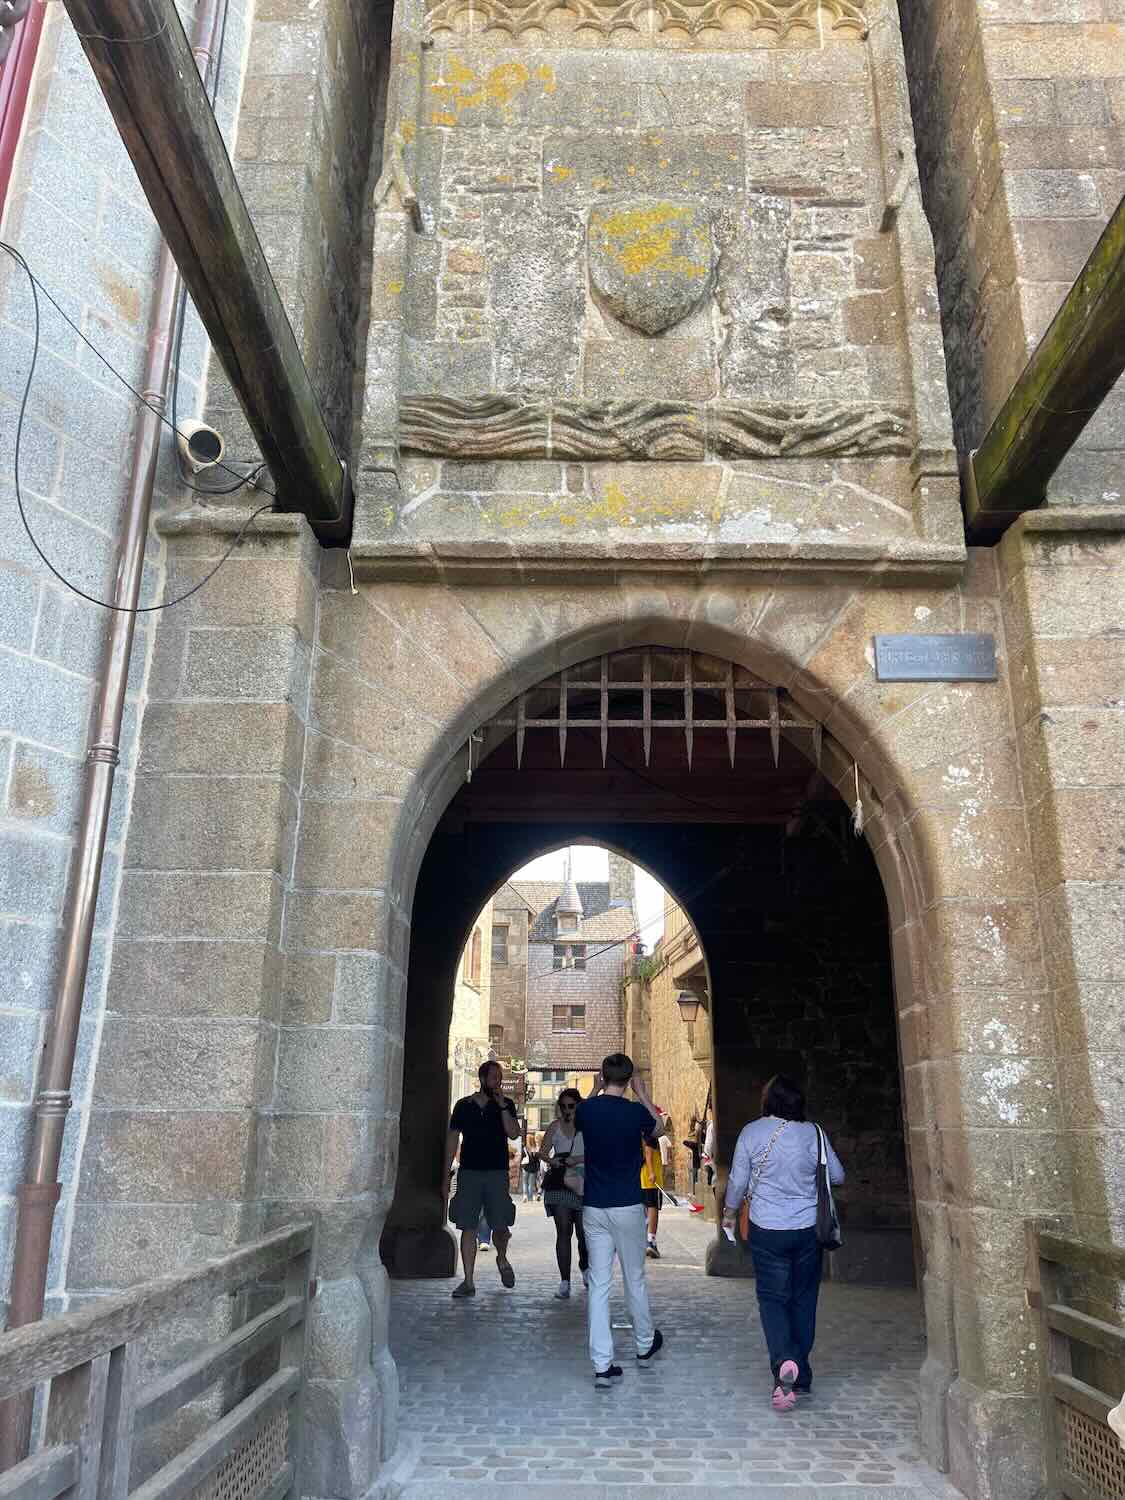 Visitors walk through a medieval stone archway leading into Mont Saint Michel, highlighting the historic and preserved architecture.